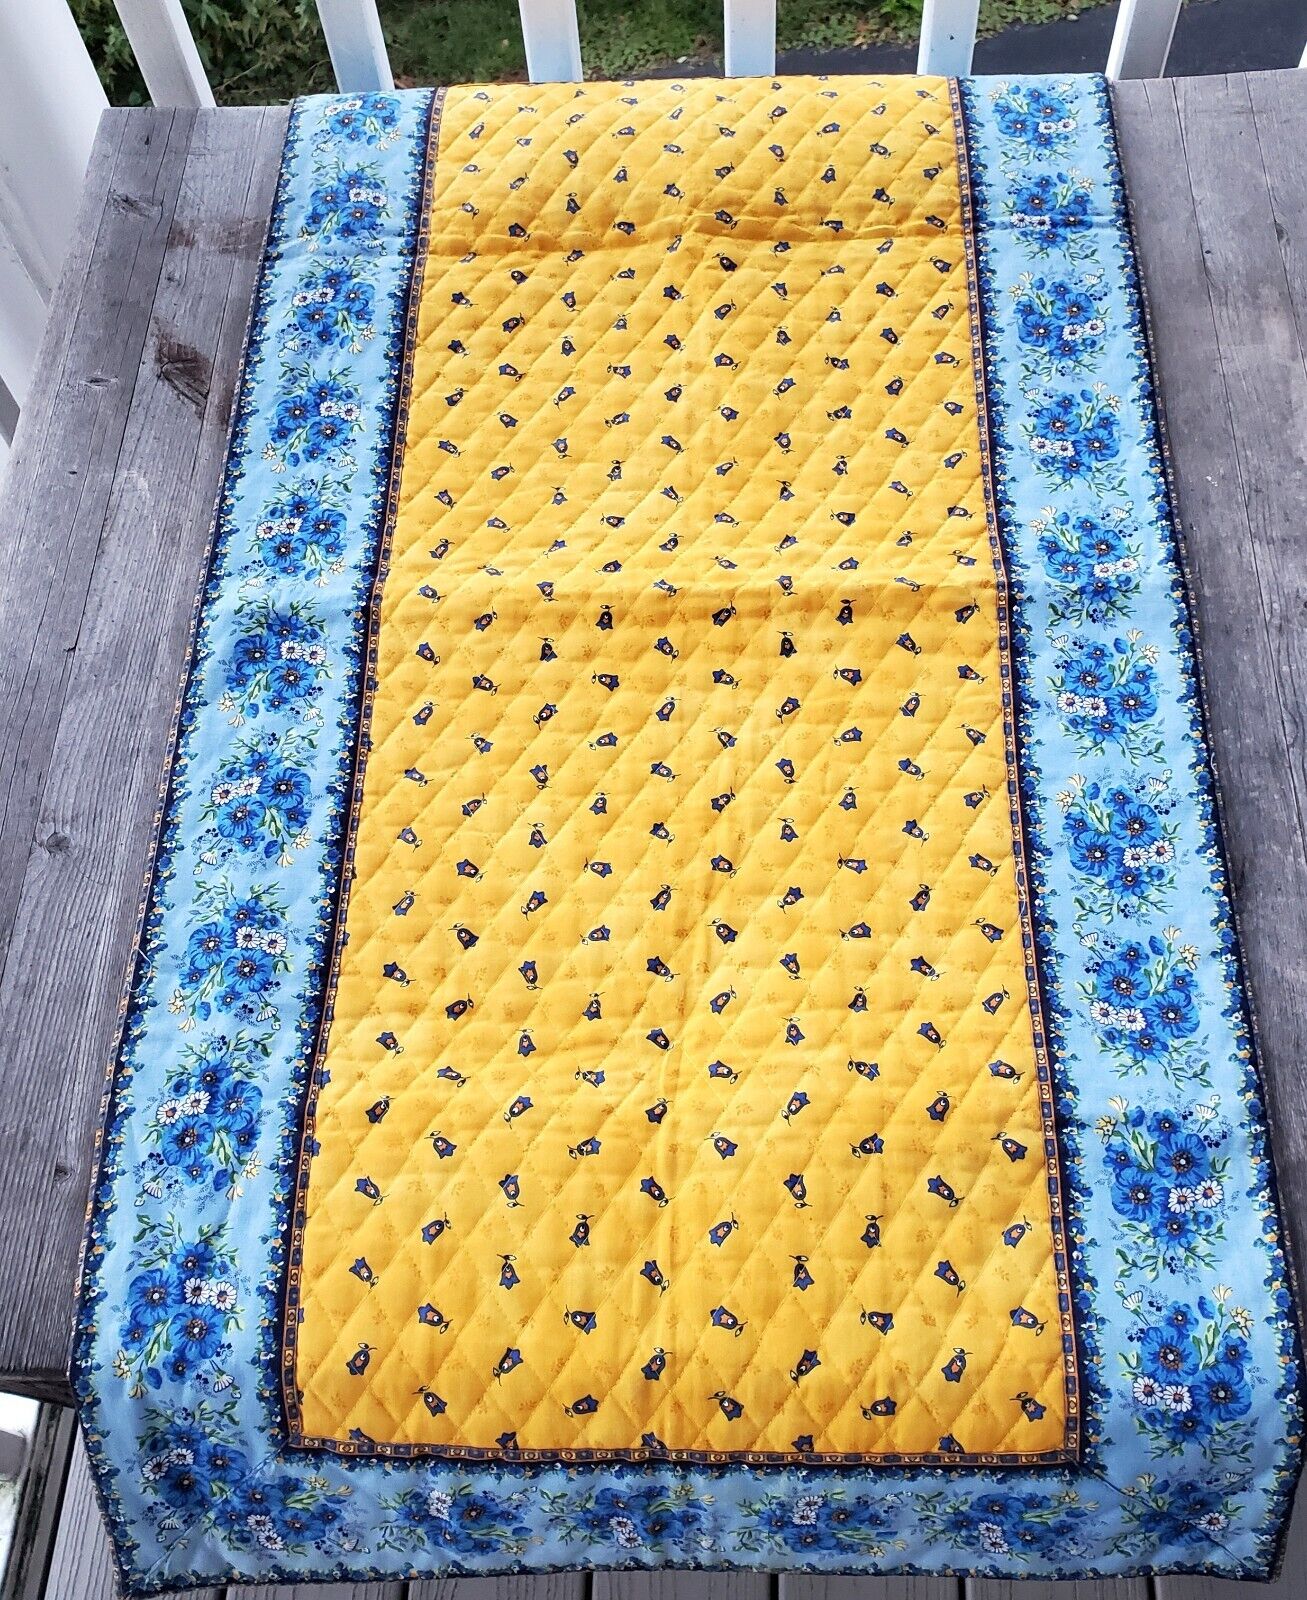 French Provencal Marat Avignon Tradition Quilted Runner Blue/Yellow Floral 38x20